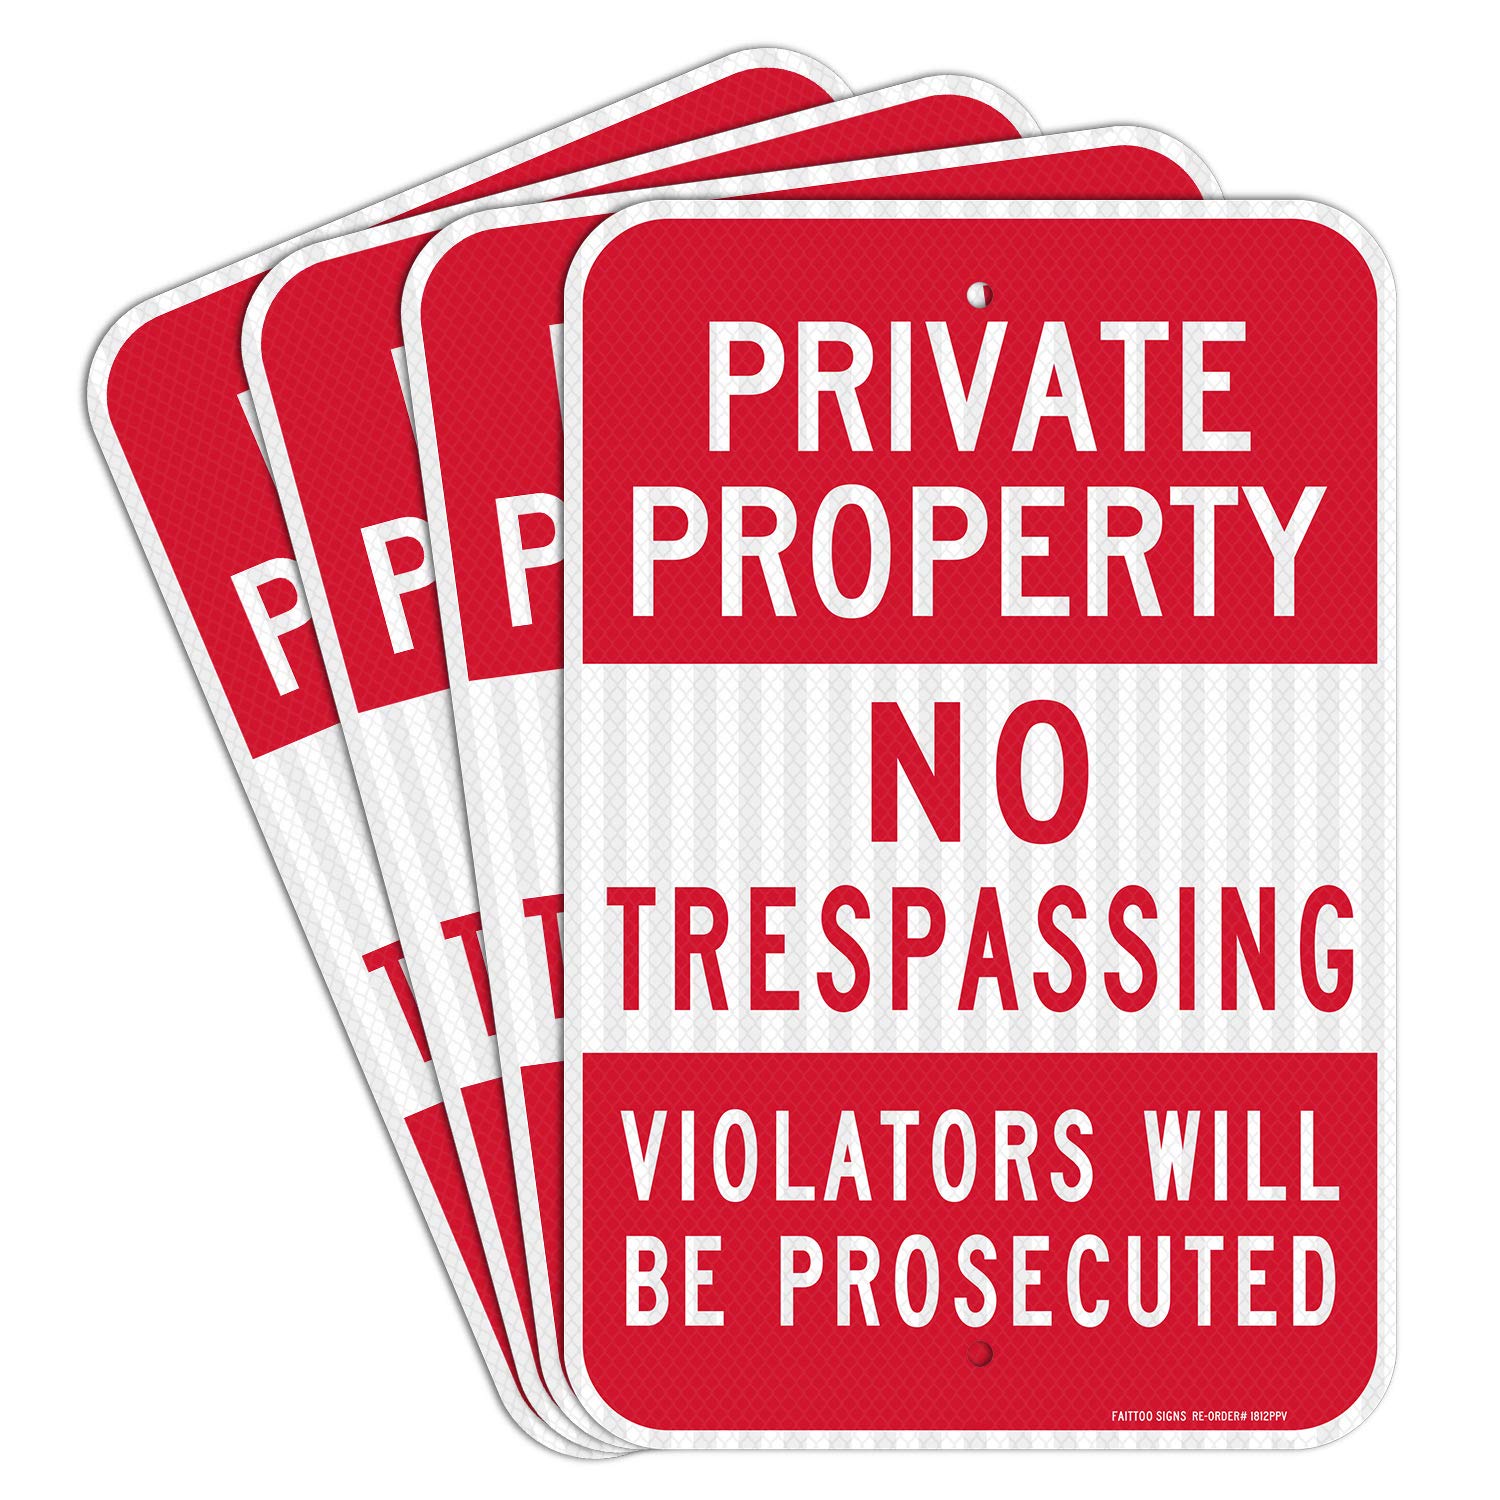 (4 Pack) Private Property No Trespassing Sign, Violators Will Be Prosecuted, 18 x 12 Engineer Grade Reflective Sheeting Rust Free Aluminum, Weather Resistant, Waterproof, Durable Ink, Easy to Mount